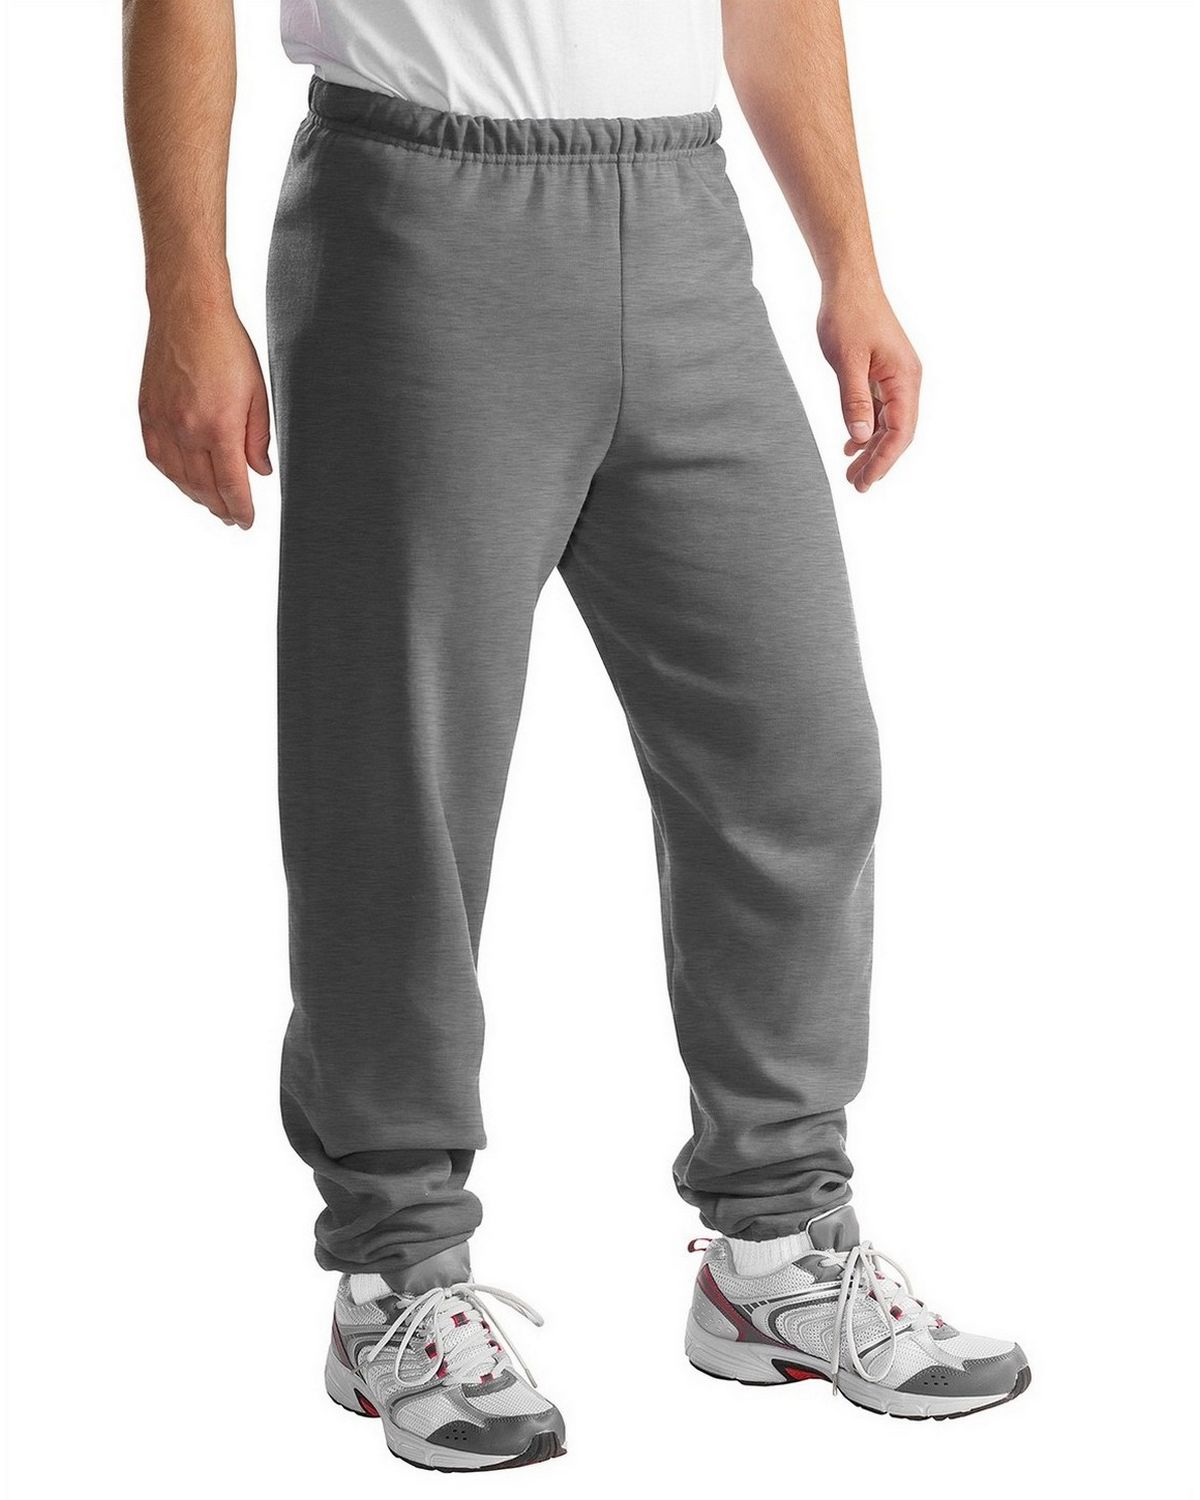 Size Chart for Jerzees 973M NuBlend Sweatpant